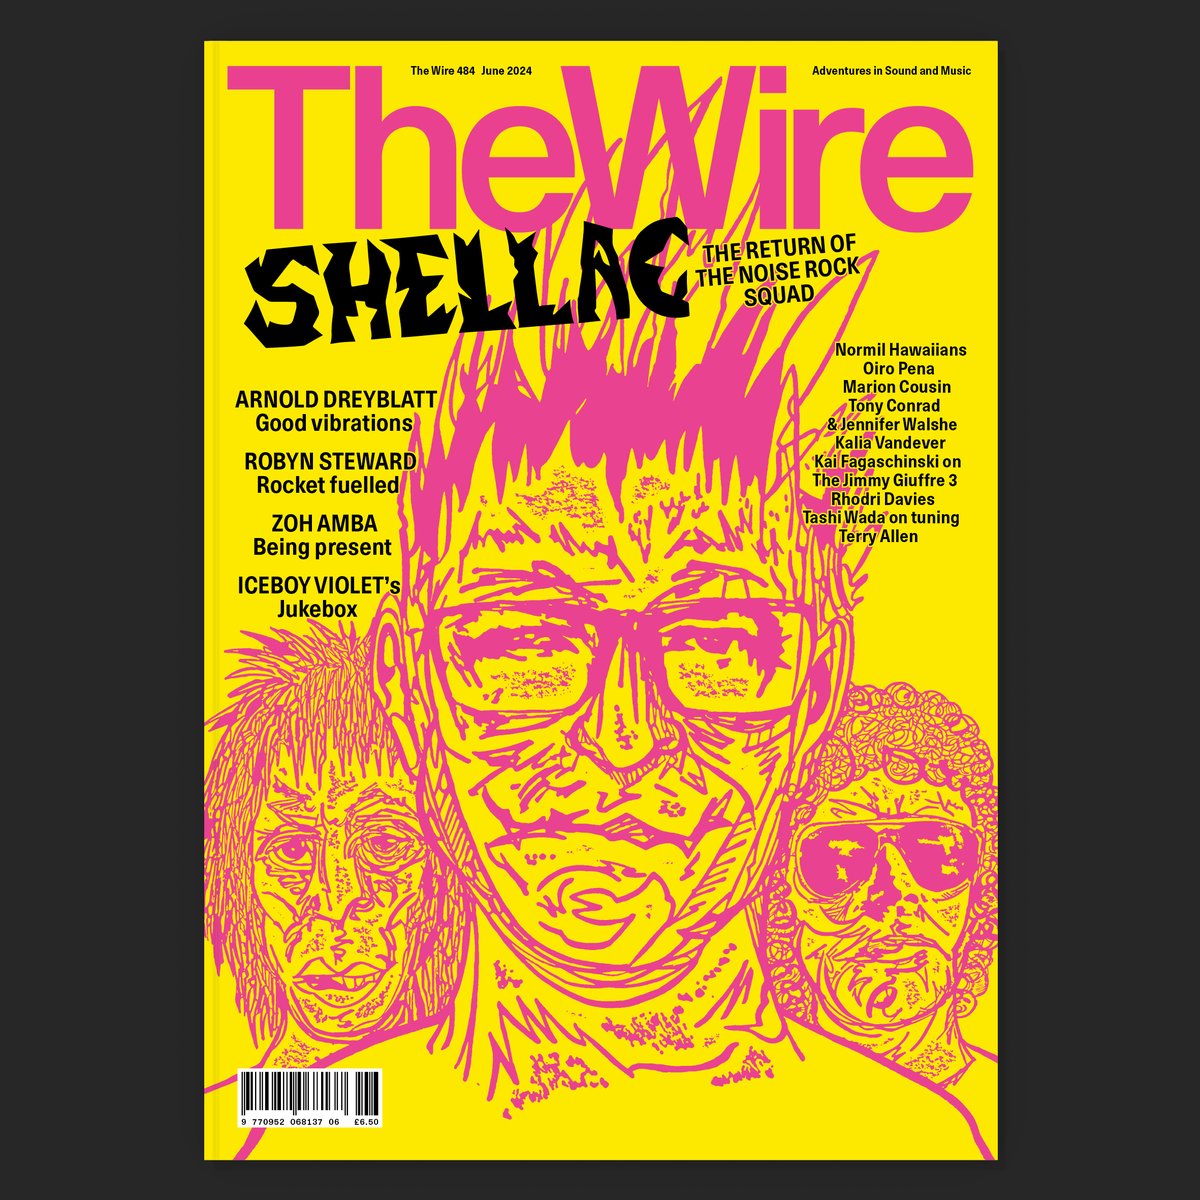 The Wire 484 is out now! thewire.co.uk/issues/484 Shellac: The US noise rock survivors are hard as rails on long awaited new album To All Trains. By Emily Pothast. Plus: Arnold Dreyblatt, Robyn Steward, Zoh Amba, Iceboy Violet, Kalia Vandever, Normil Hawaiians, and much more!